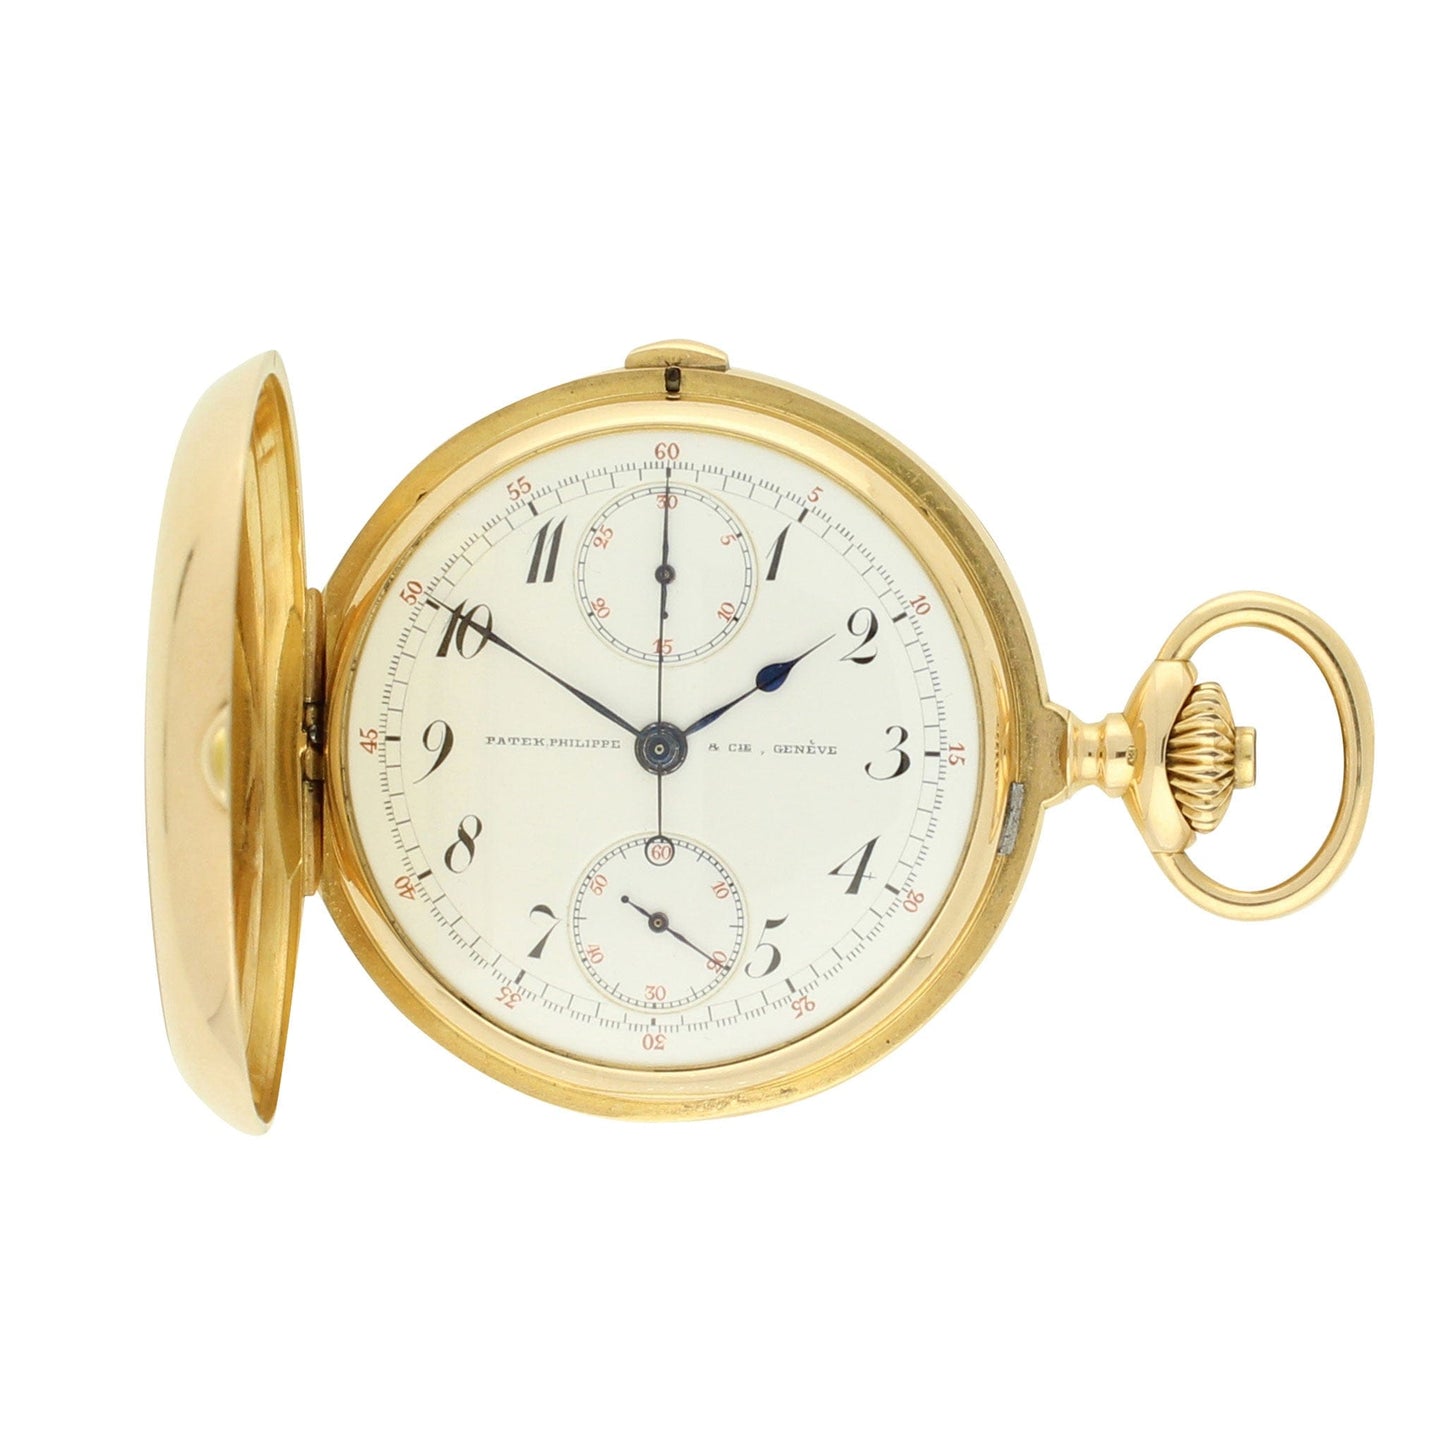 18ct rose gold Patek Philippe hunter case single button chronograph pocket watch. Made 1897